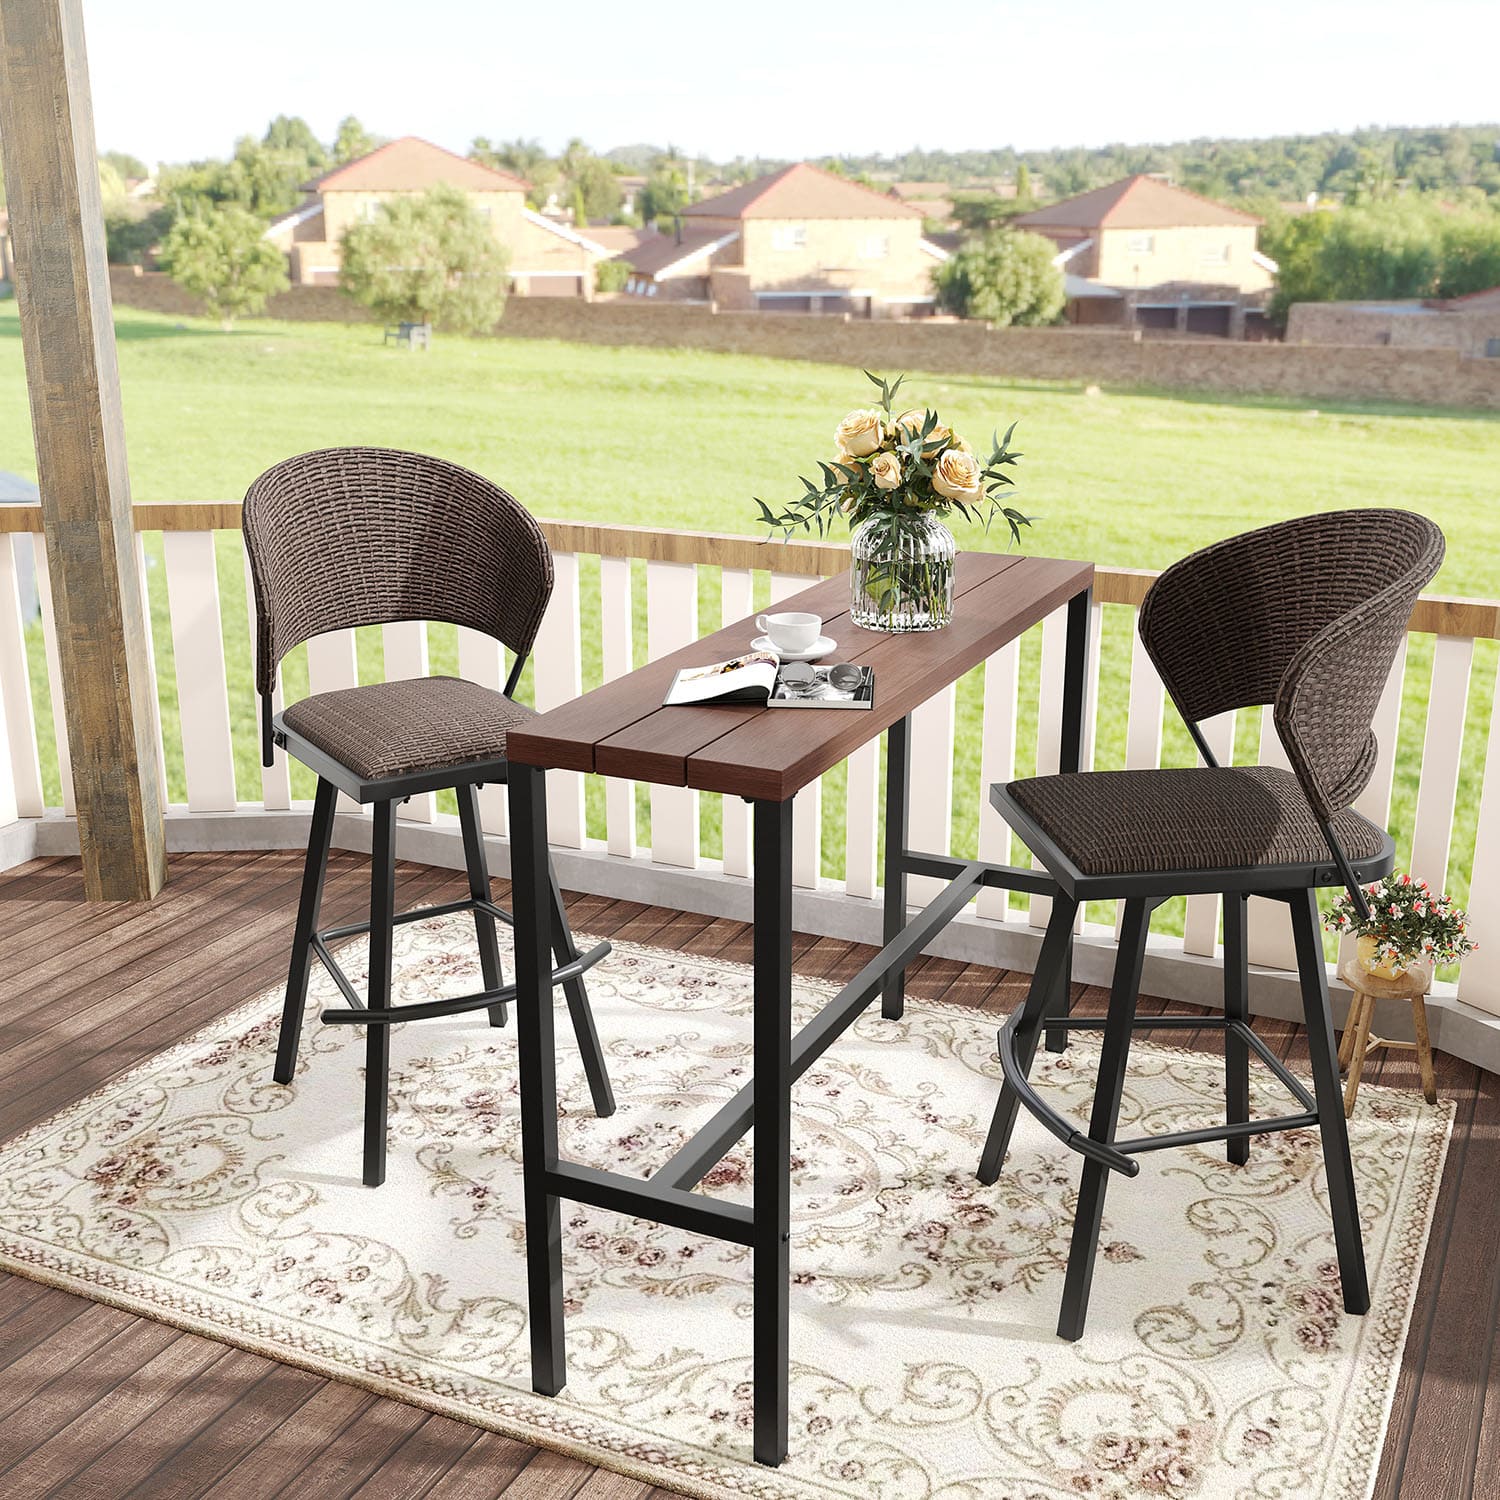 Vicllax 3 PCS Outdoor Swivel Bar Set, Patio Bar Height Wicker Chairs and Rectangular Bar Table